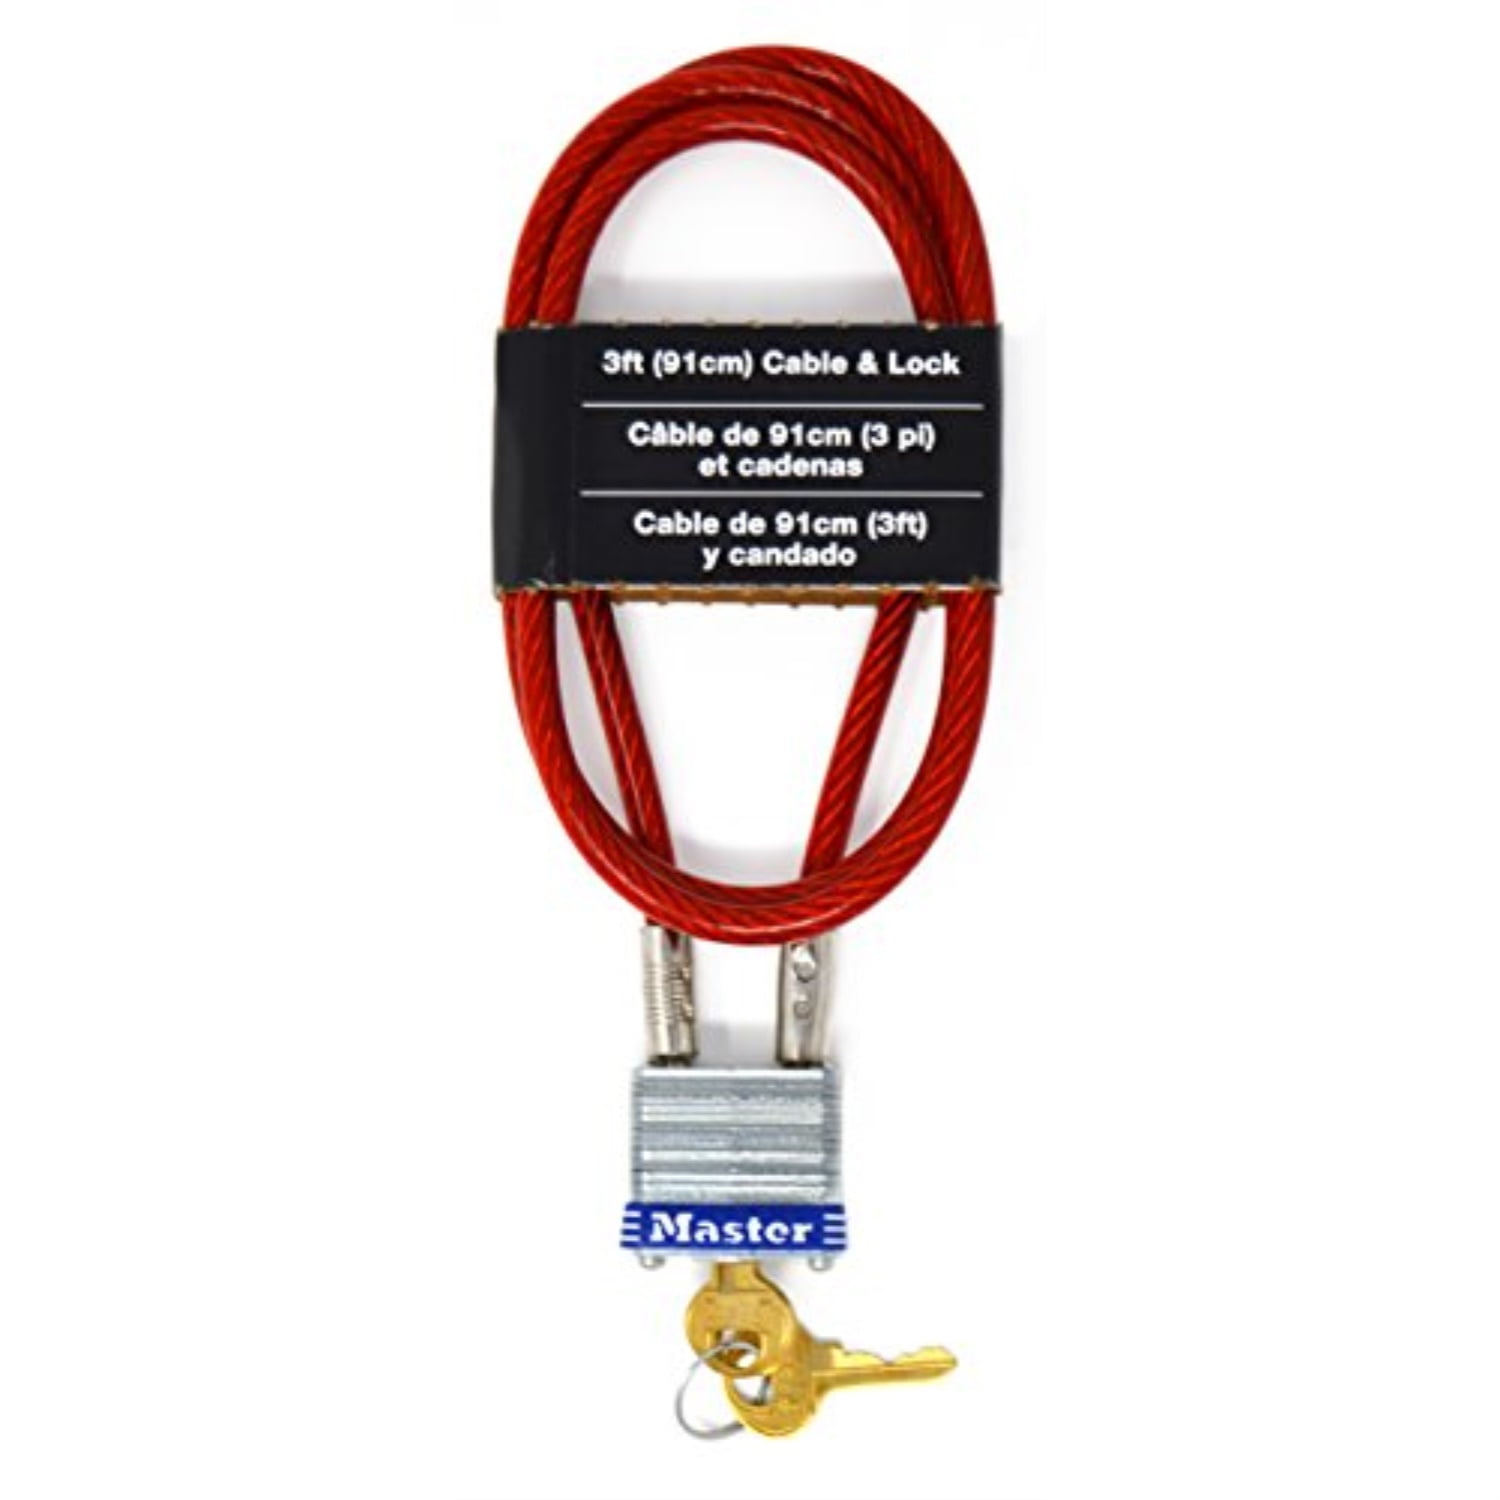 15 Inch Ultra Strong Cable and 1 3/16/30 mm Coated Padlock BUYS Many to Open with The Same Key Prevent/Protect Items from Unauthorized use 130KA Candado con Guaya MADOL